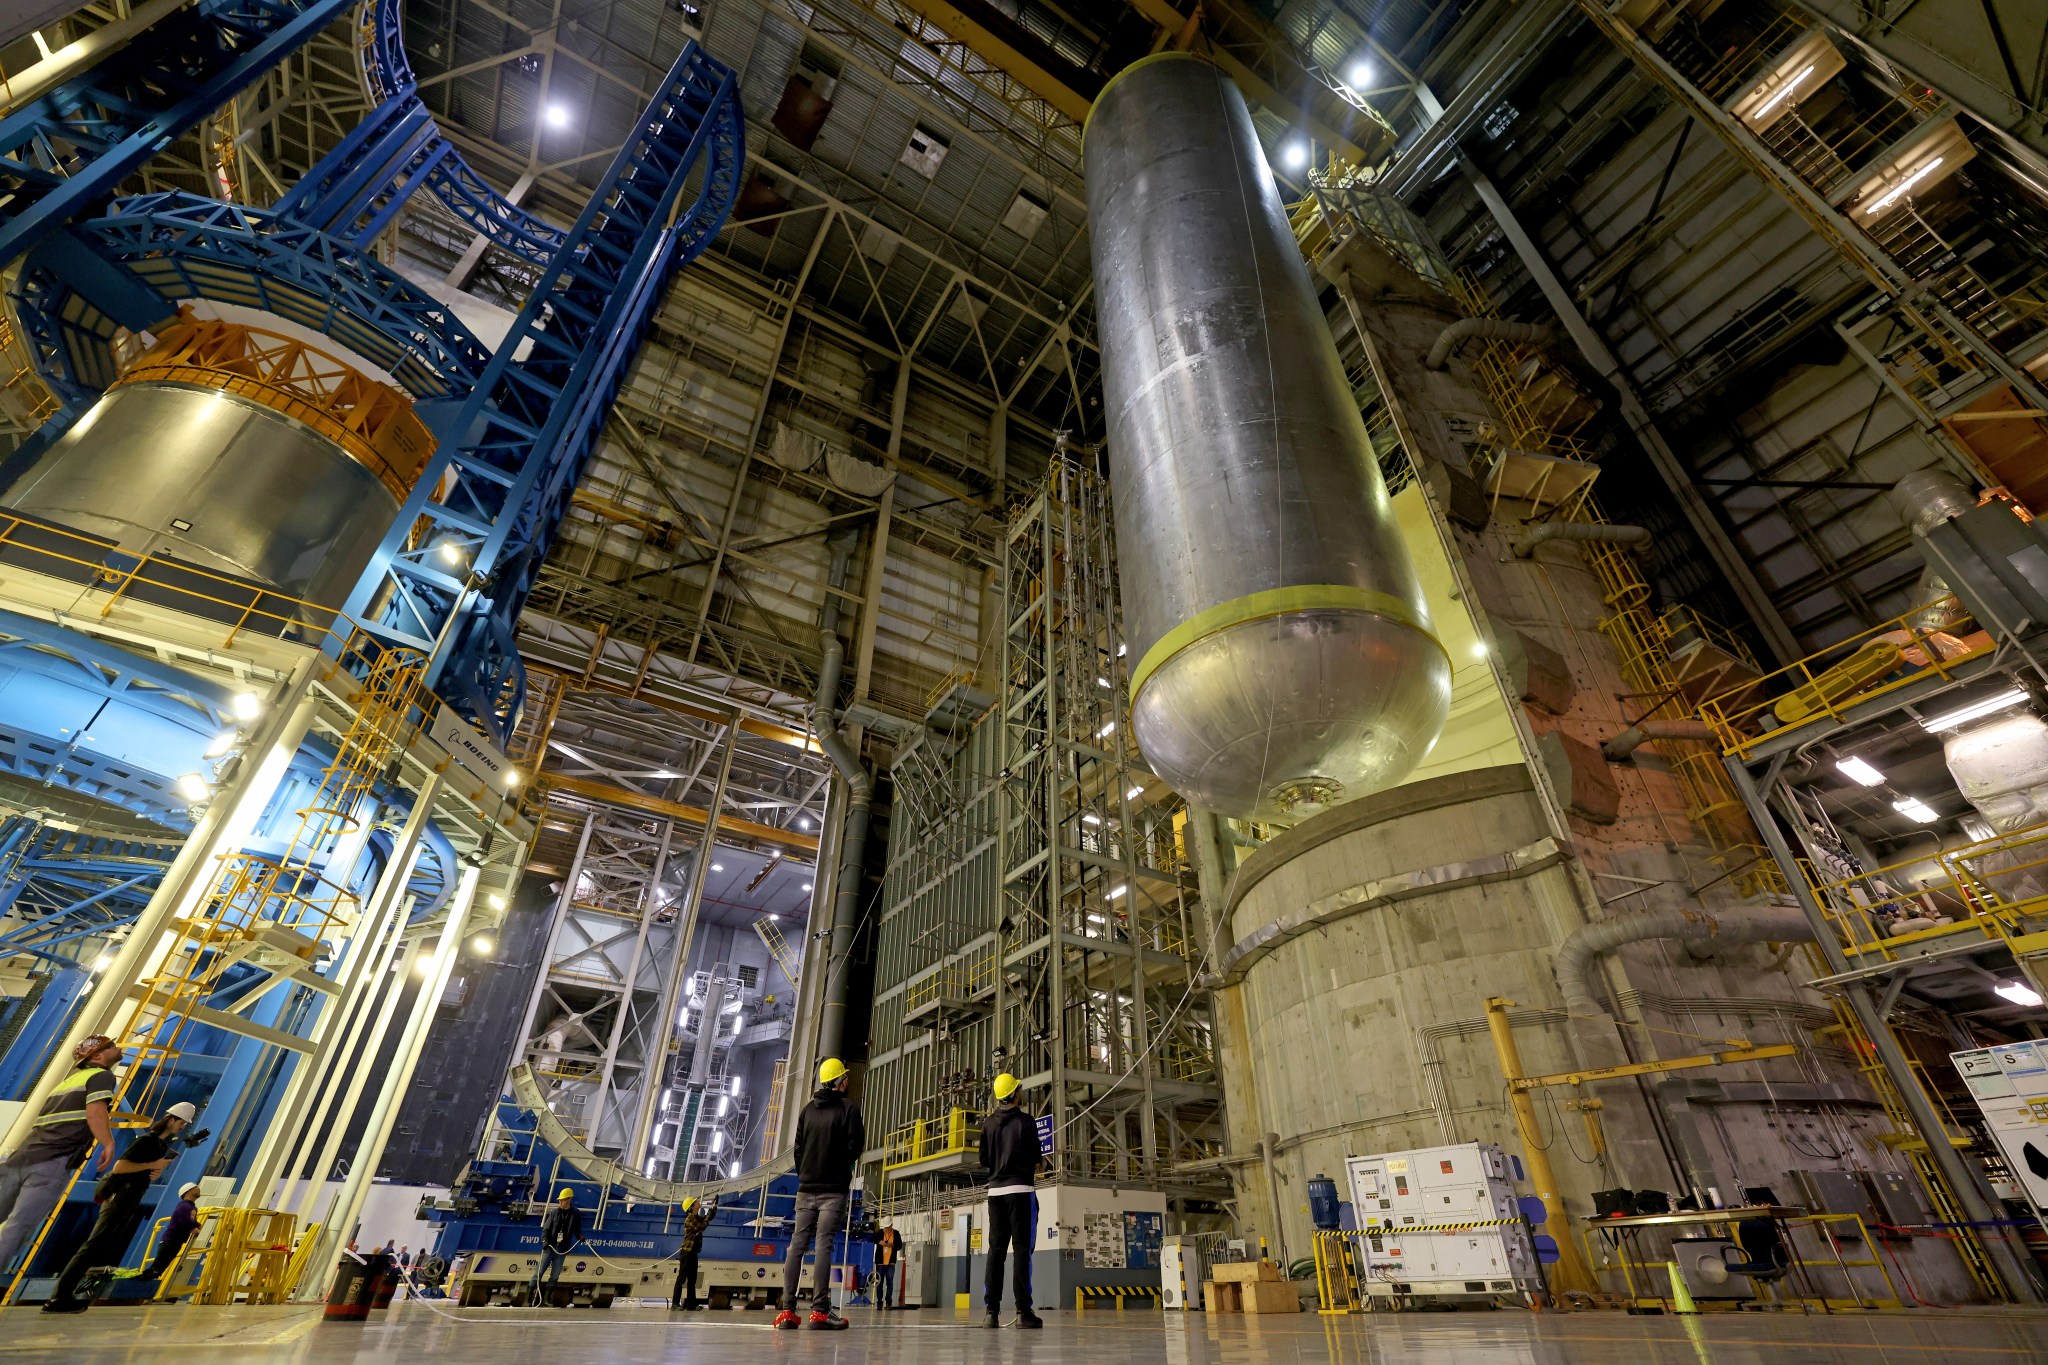 All the major structures that will form the core stage for NASA's SLS (Space Launch System) rocket for the agency's Artemis III mission are structurally complete. Technicians finished welding the 51-foot liquid oxygen tank structure, left, inside the Vertical Assembly Building at NASA's Michoud Assembly Facility in New Orleans Jan. 8. The liquid hydrogen tank, right, completed internal cleaning Nov. 14.